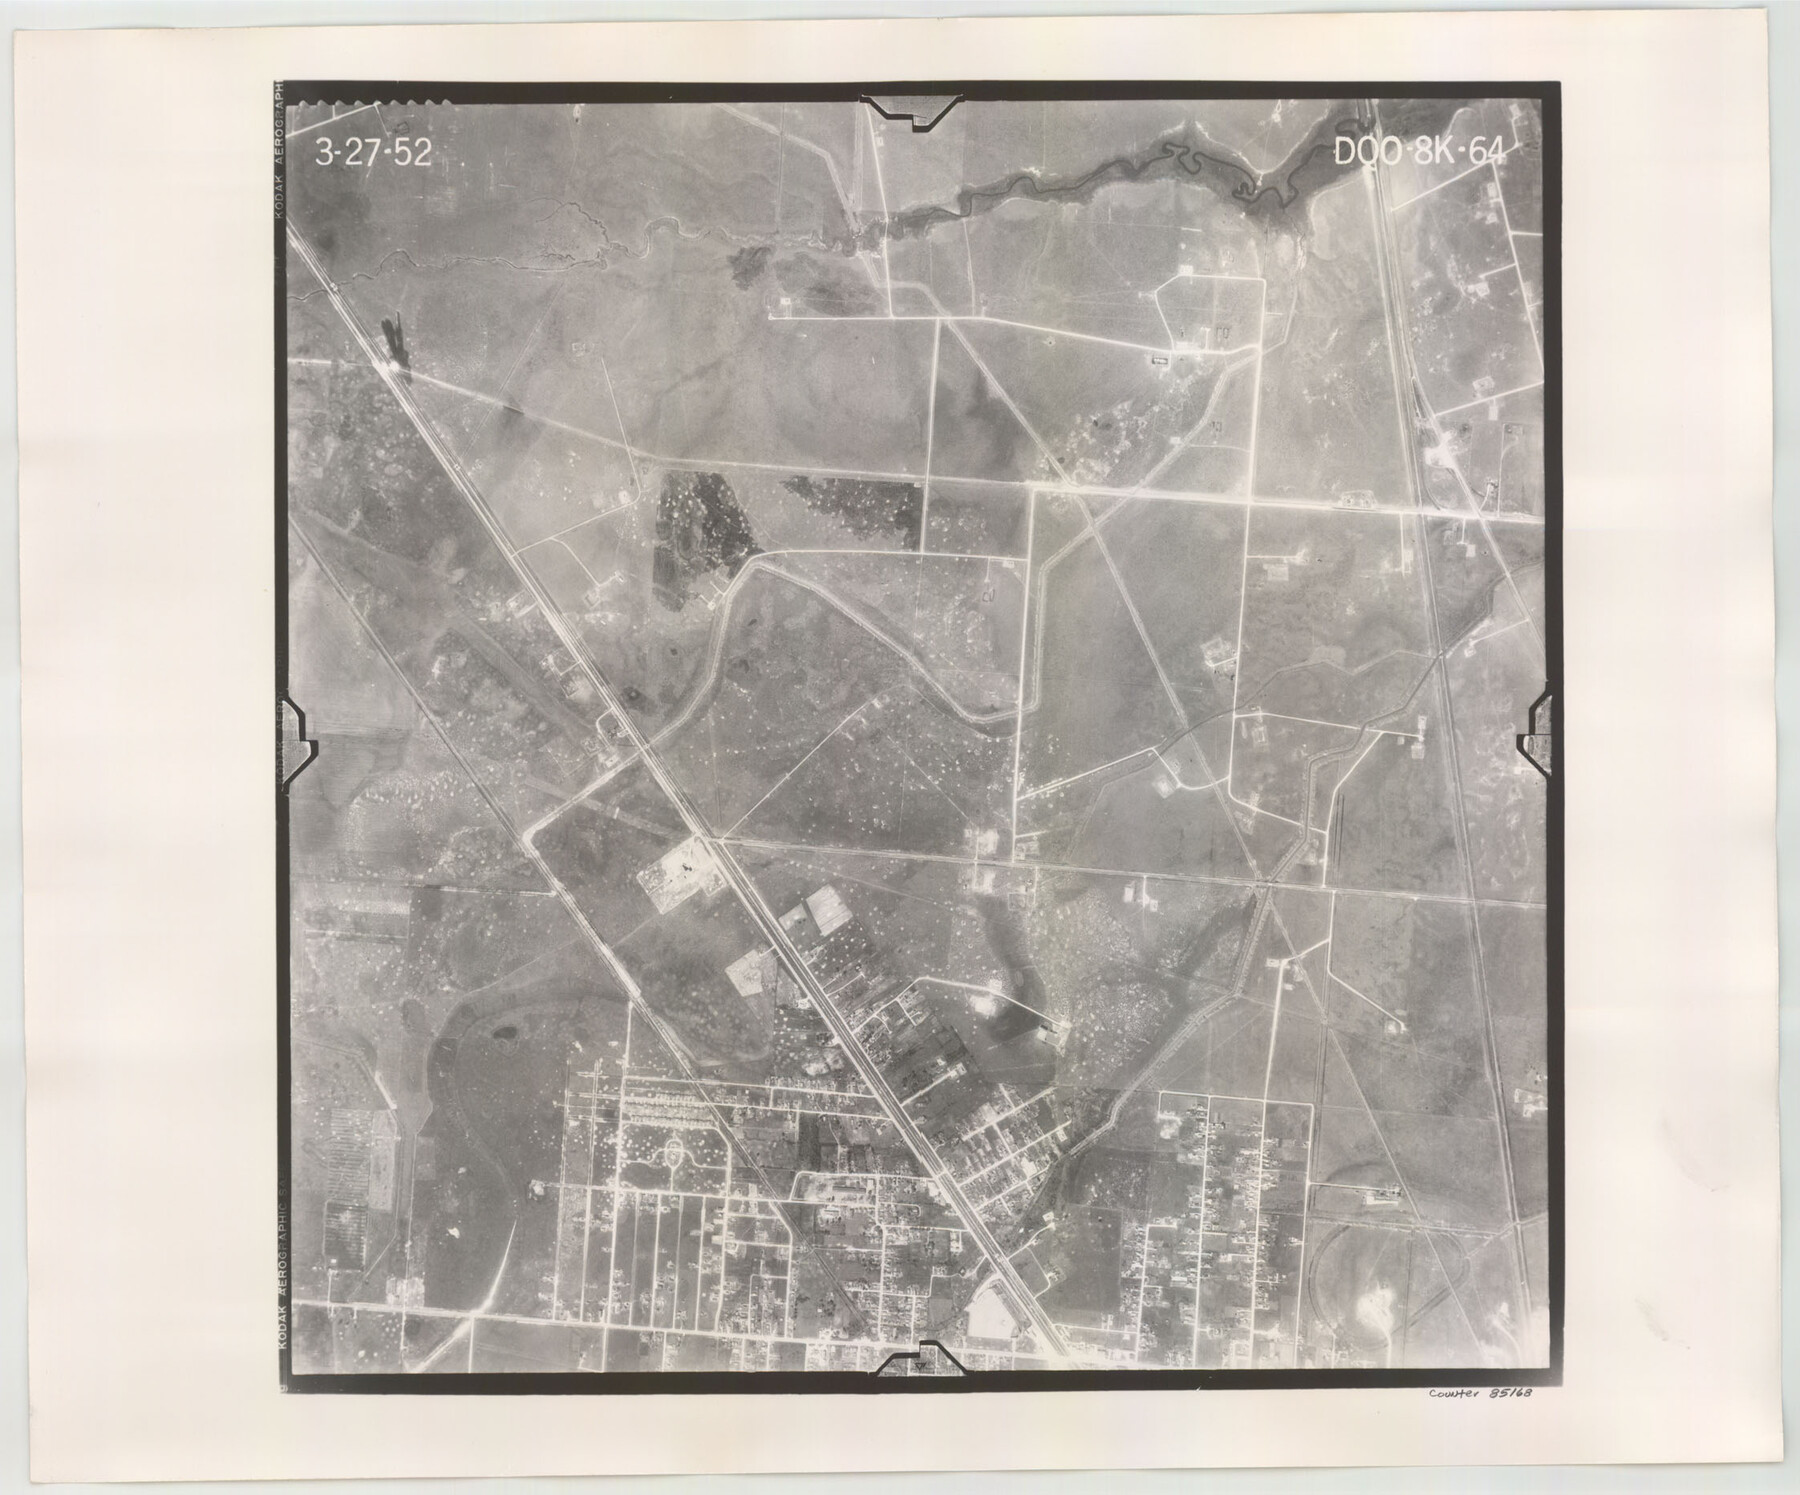 85168, Flight Mission No. DQO-8K, Frame 64, Galveston County, General Map Collection